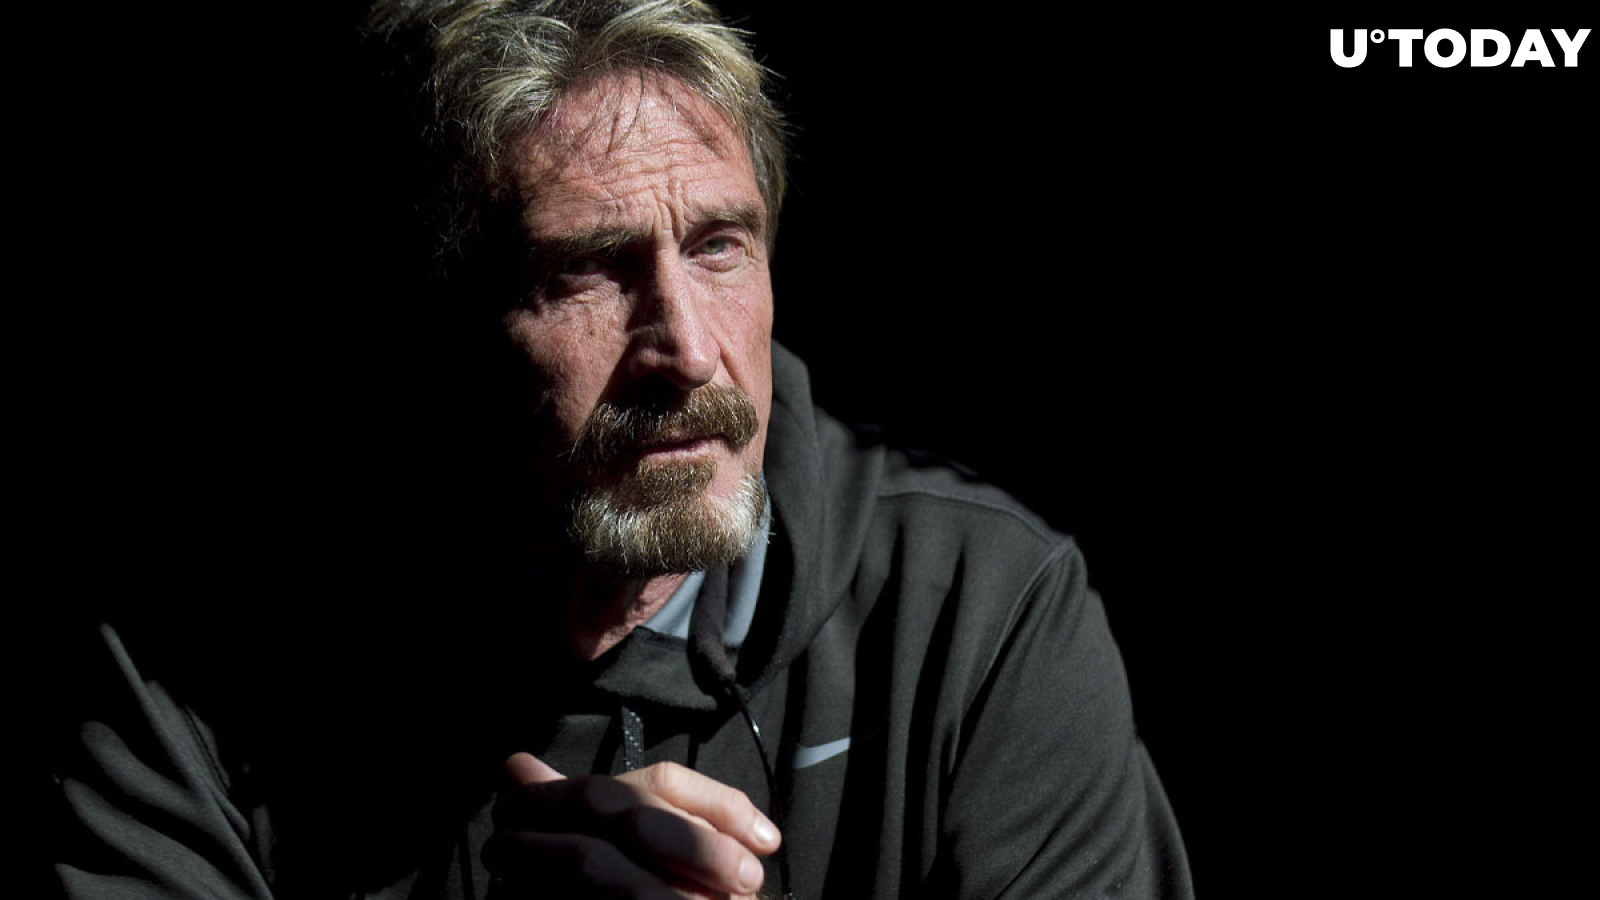 John McAfee Explains Why He Does Not Invest in Crypto but Still Supports It